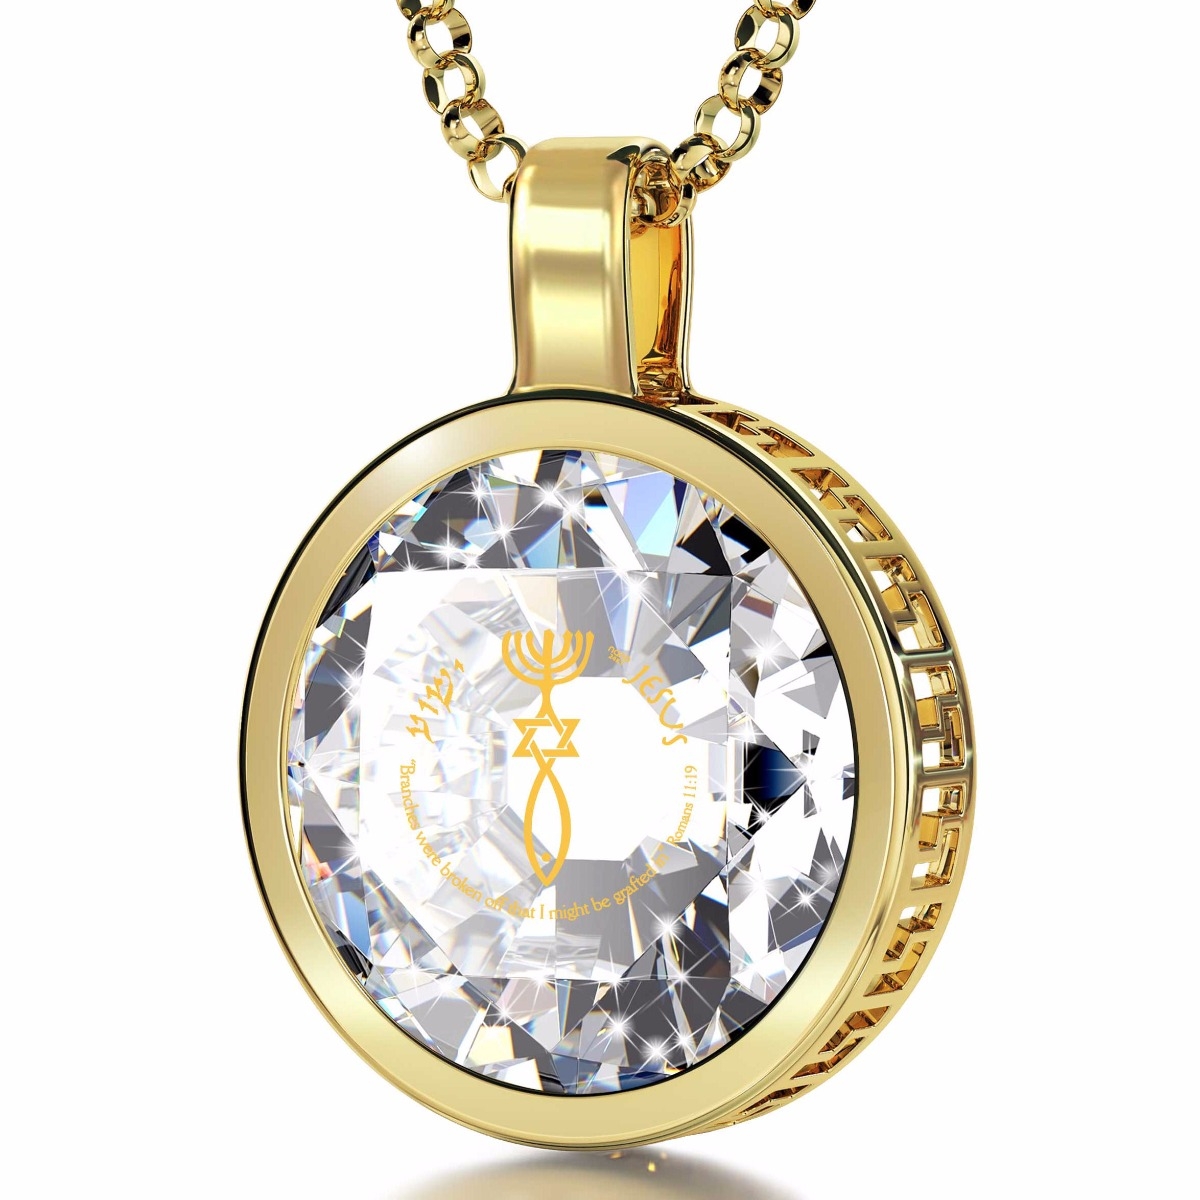 Nano 24K Gold Plated and Gemstone Grafted-In Necklace with 24K Gold Micro-Inscription (White) - 1